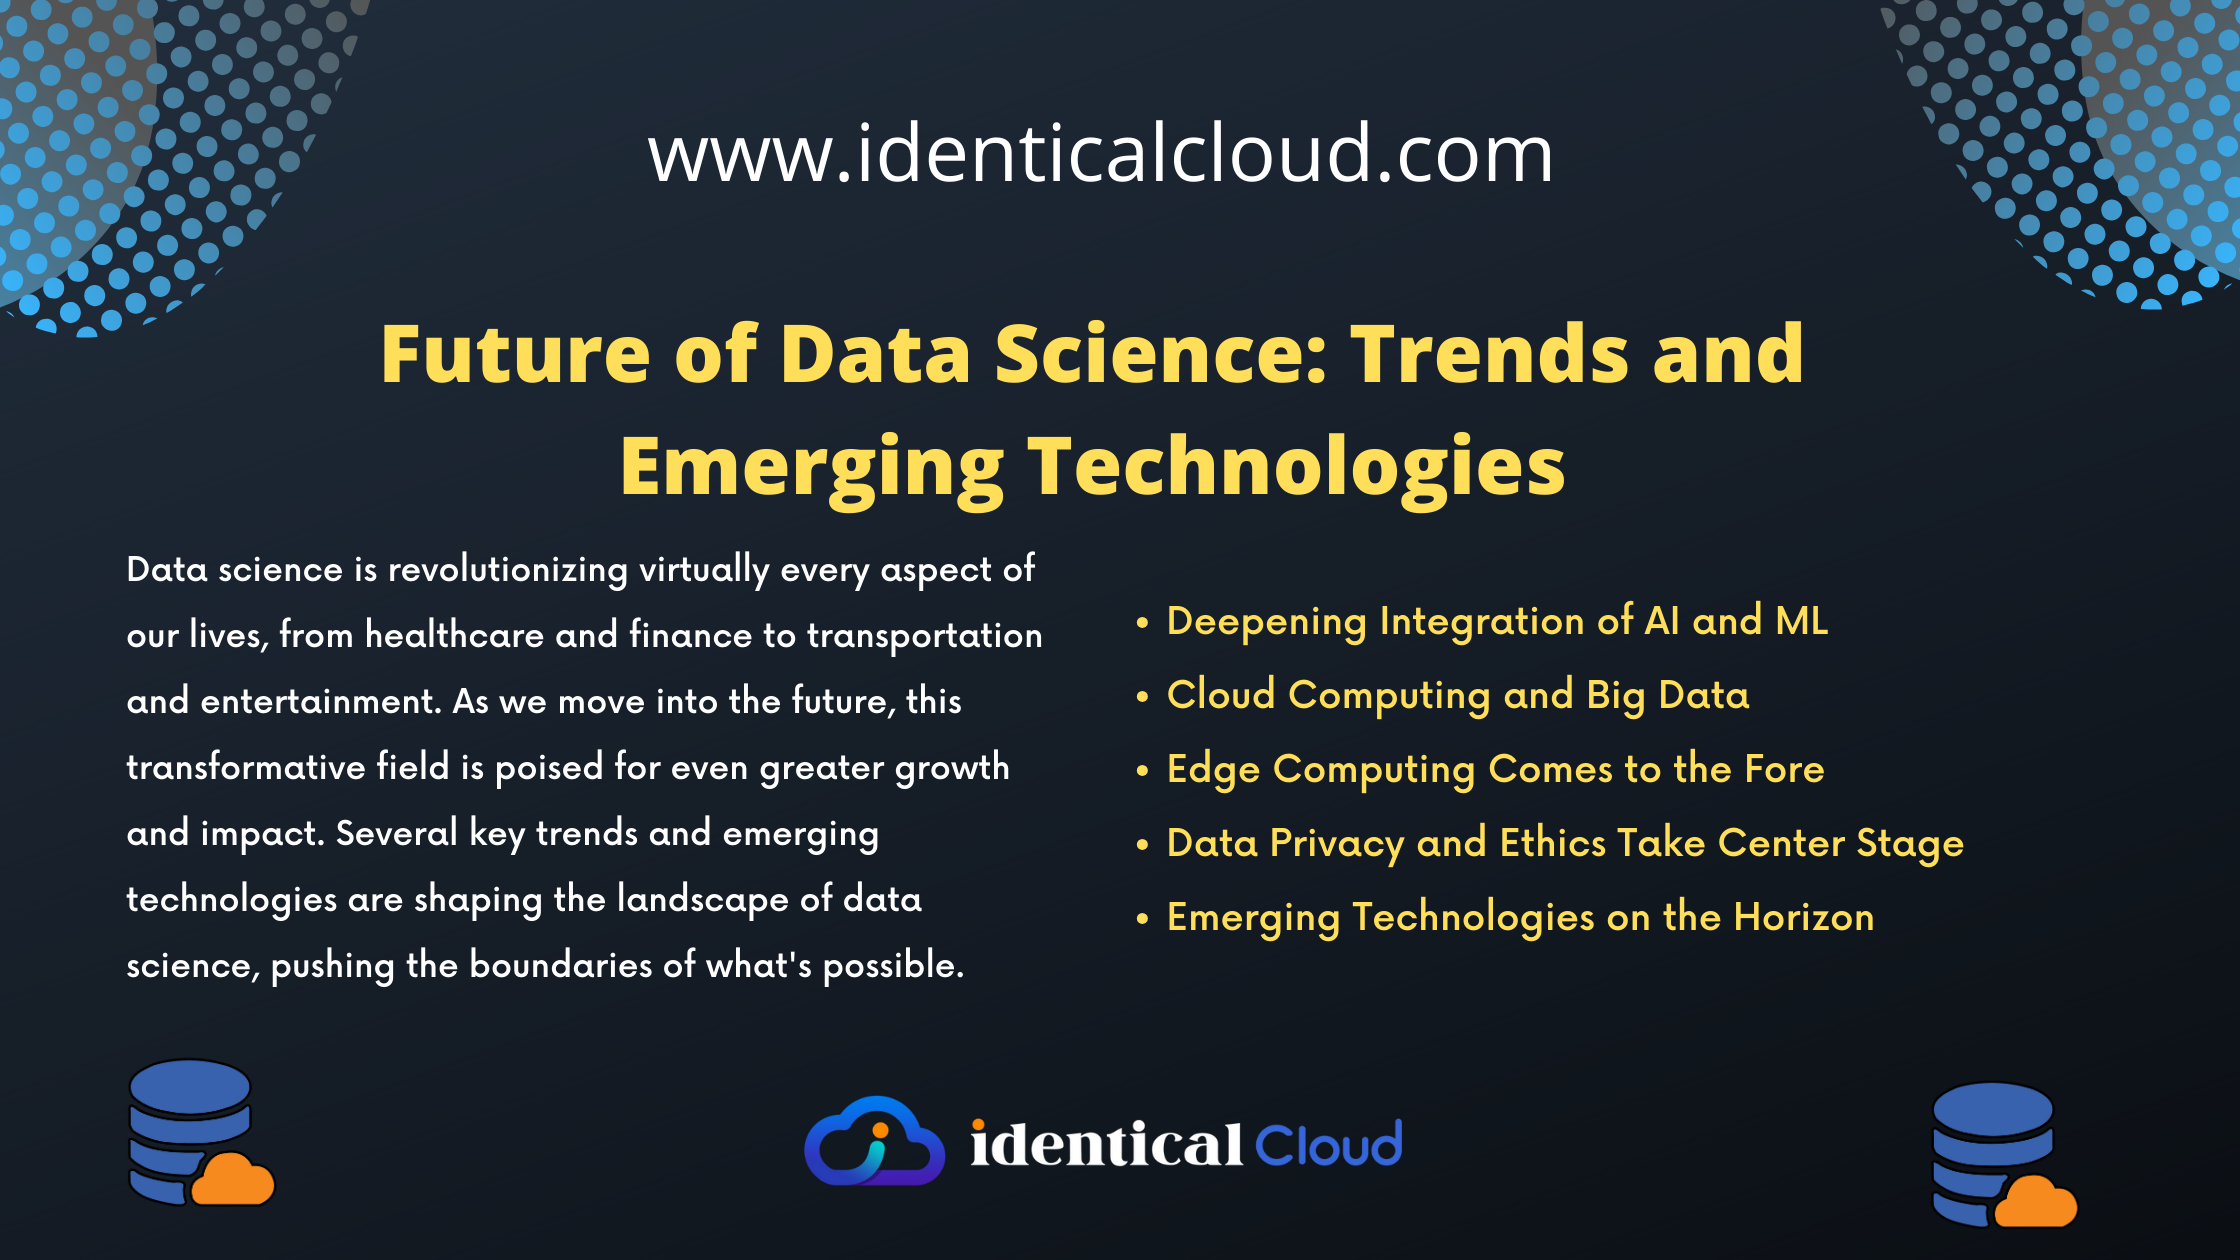 Future of Data Science Trends and Emerging Technologies - identicalcloud.com